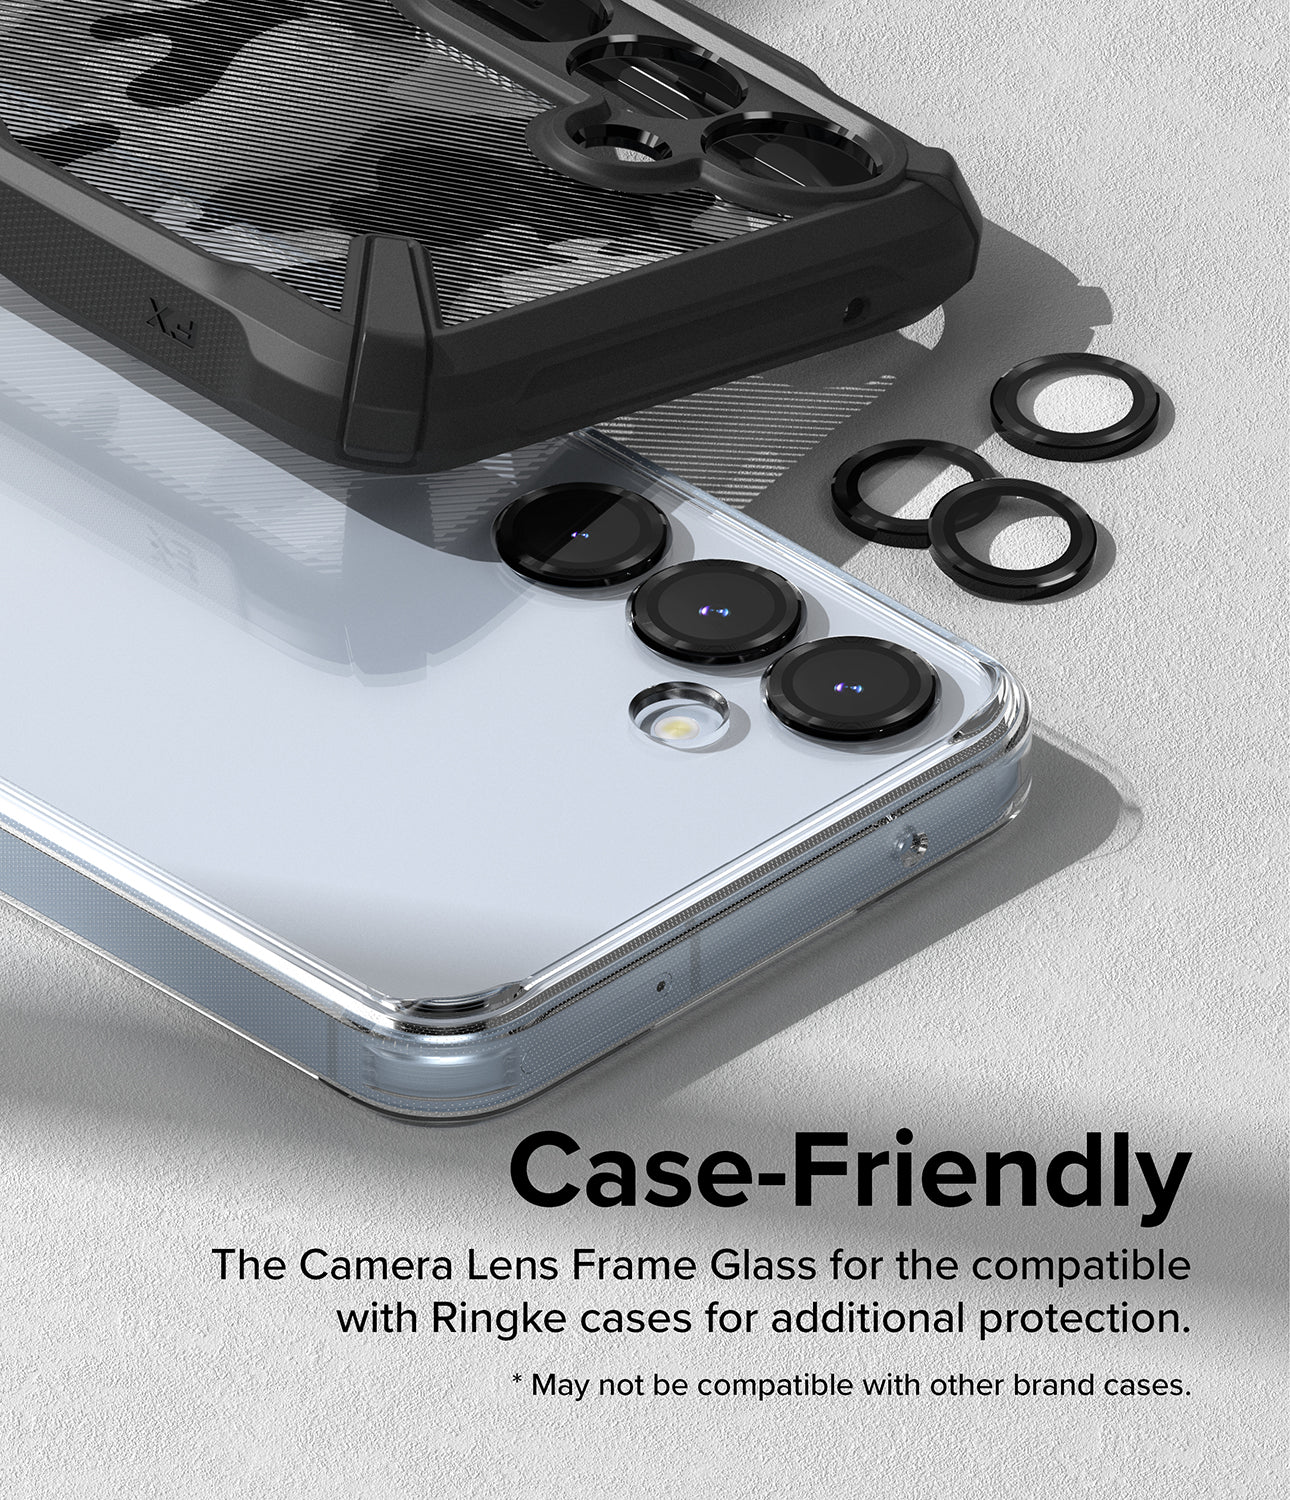 Galaxy A55 / A35 Camera Lens Frame Glass Protector - Case-Friendly. The Camera Lens Frame Glass for the compatible with Ringke cases for additional proteciton.